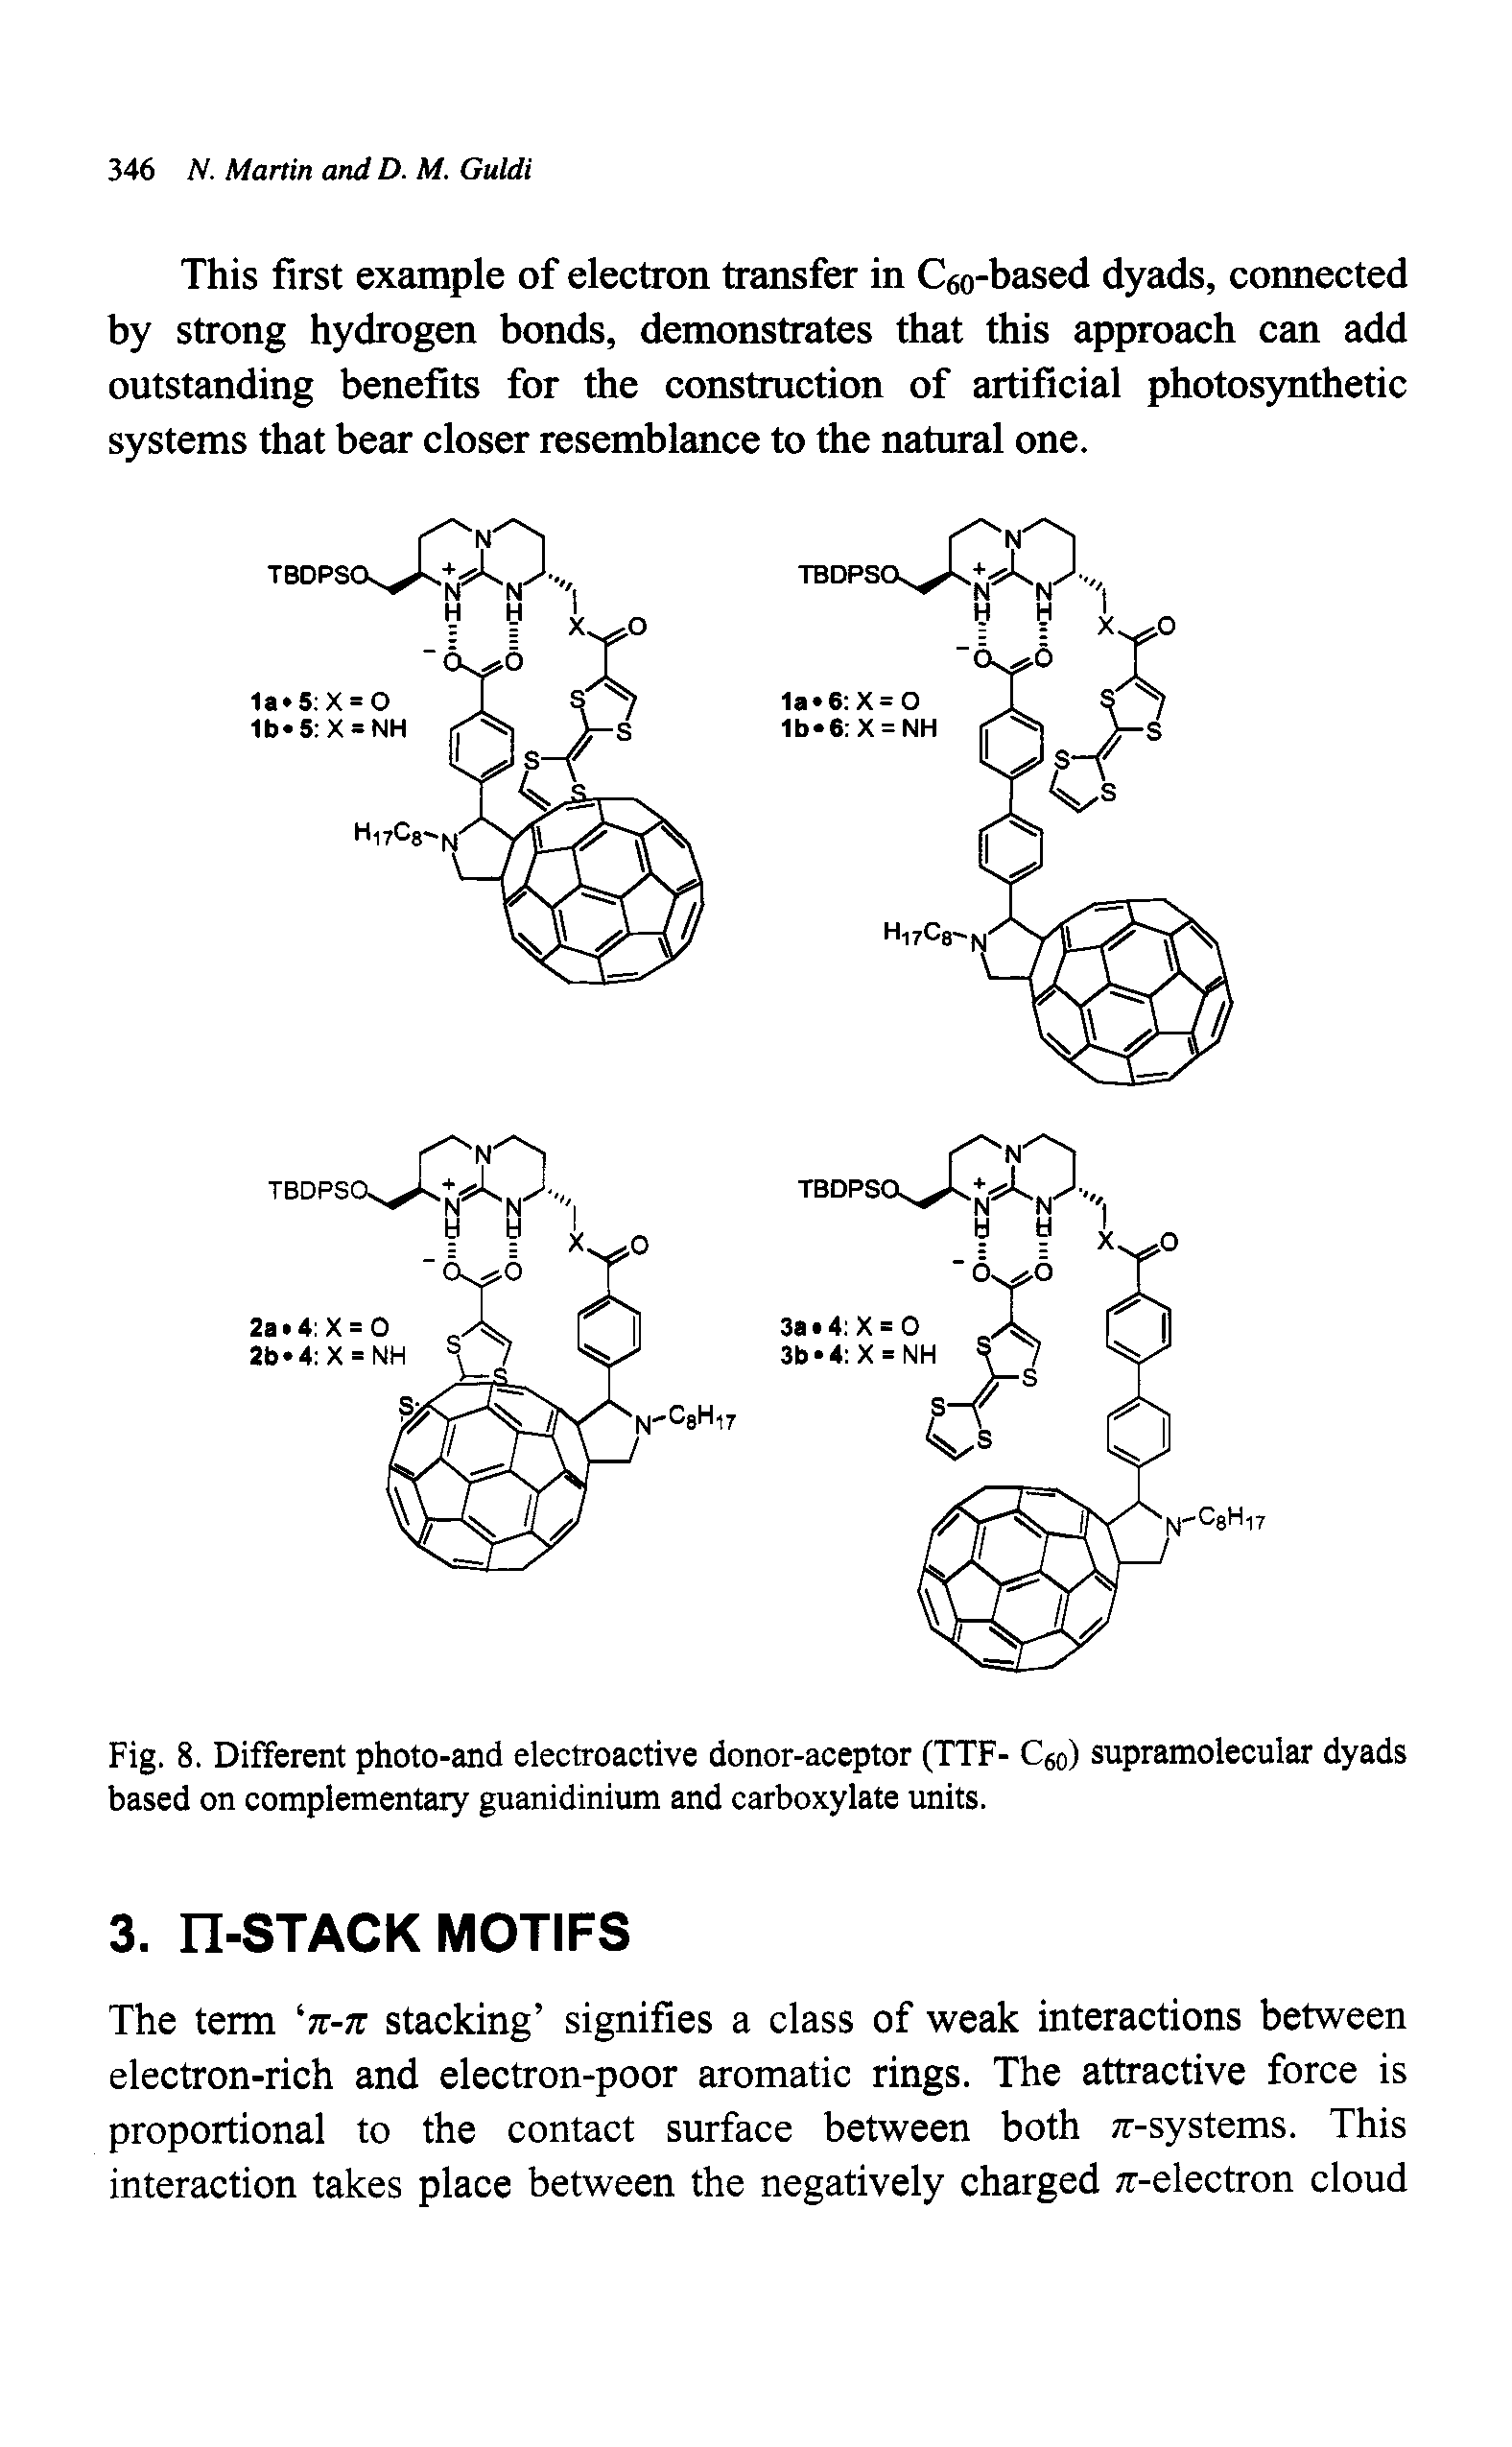 Fig. 8. Different photo-and electroactive donor-aceptor (TTF- Ceo) supramolecular dyads based on complementary guanidinium and carboxylate units.